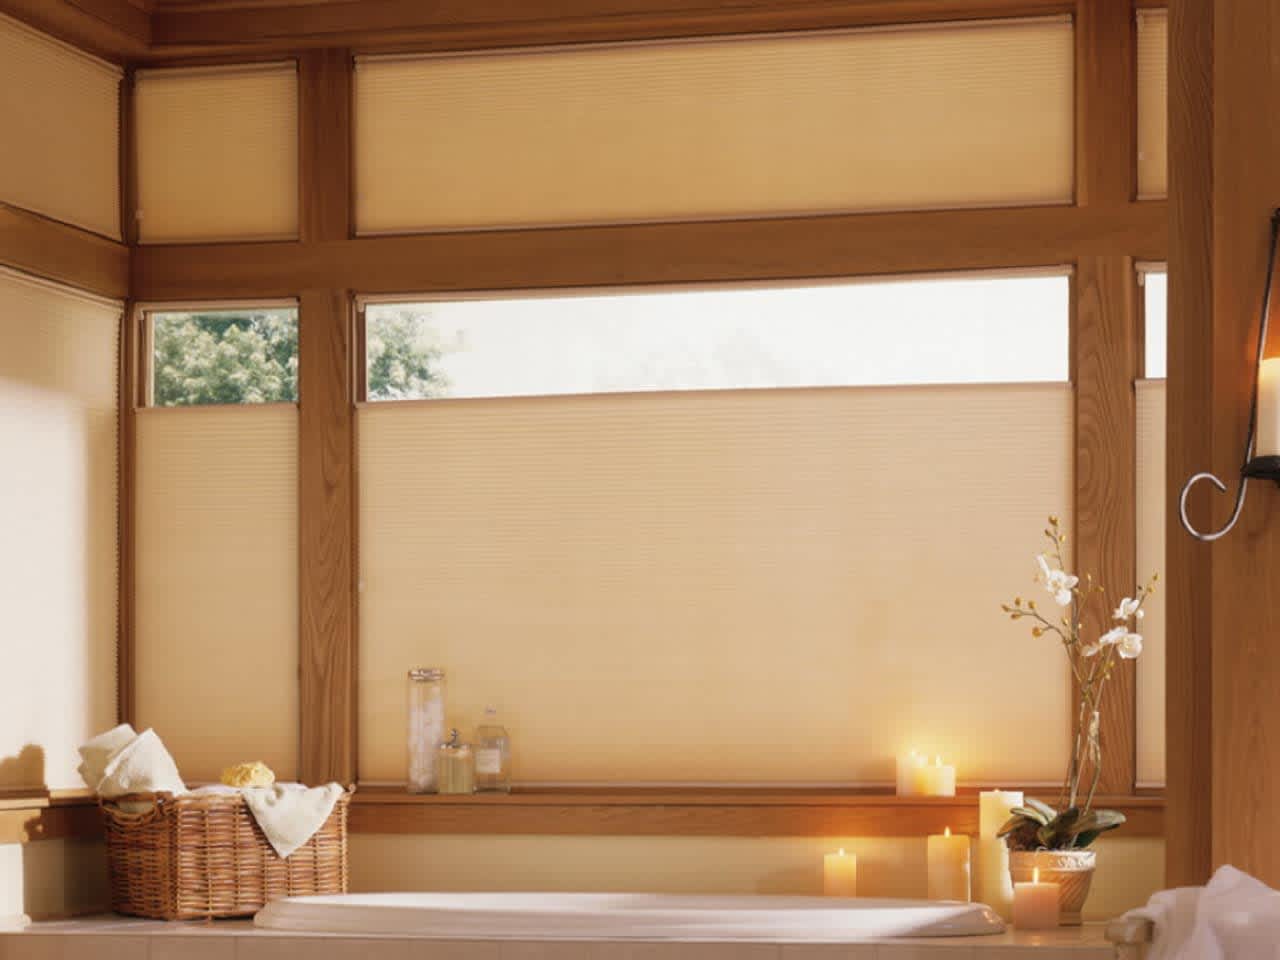 Thanks to the new PowerView blinds by Hunter Douglas, homeowners can change their room's mood from across the house or across the country.